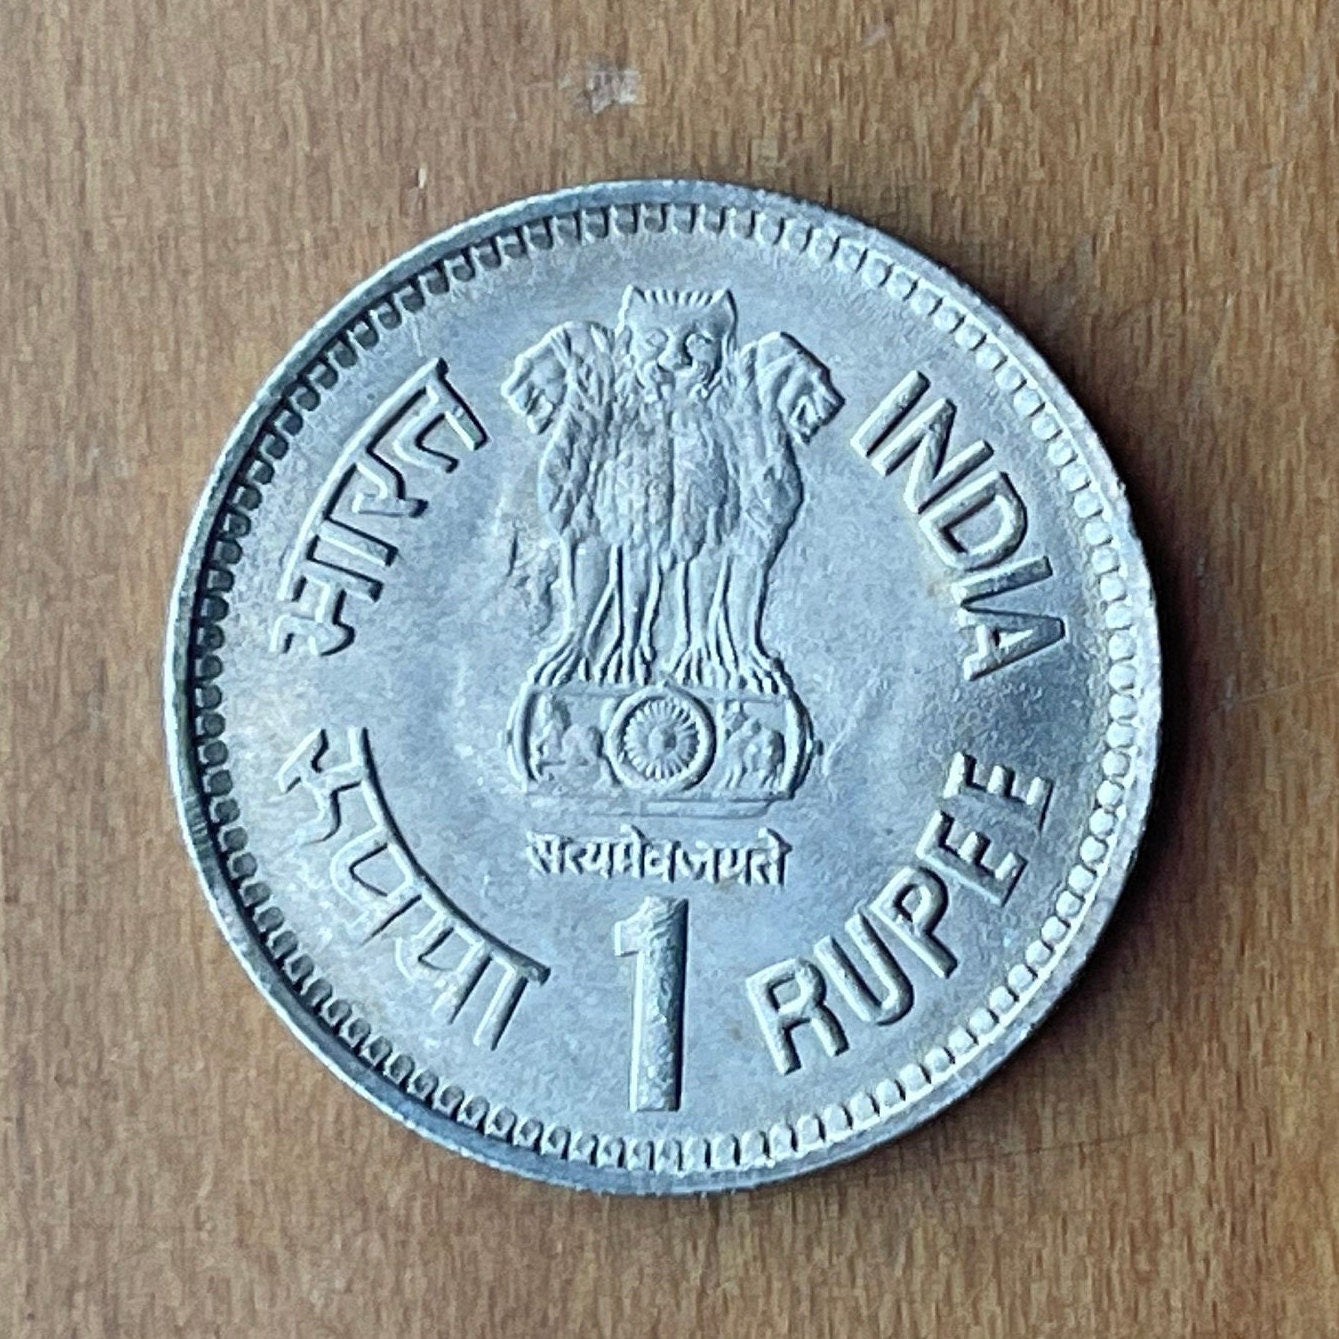 Jawaharlal Nehru & Ashoka Lion Capitol 1 Rupee Authentic Coin Money for Jewelry and Craft Making (1989) (Centenary)